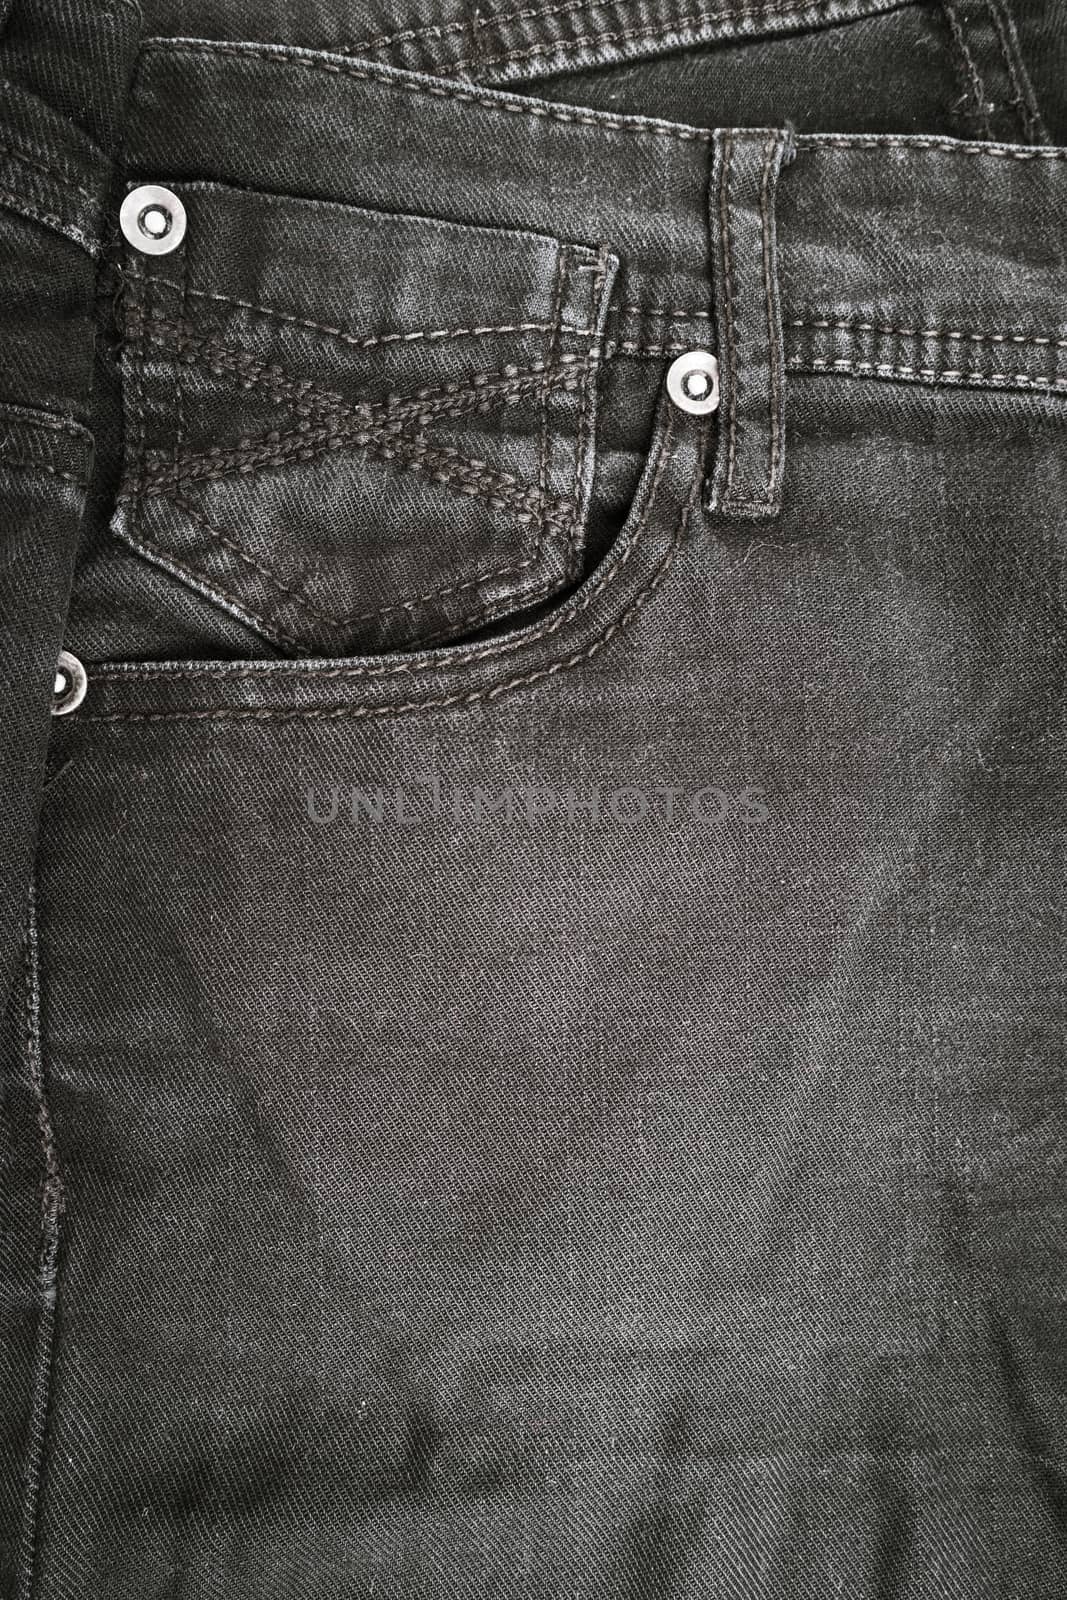 Closeup detail of black denim jeans trousers pocket by AnaMarques